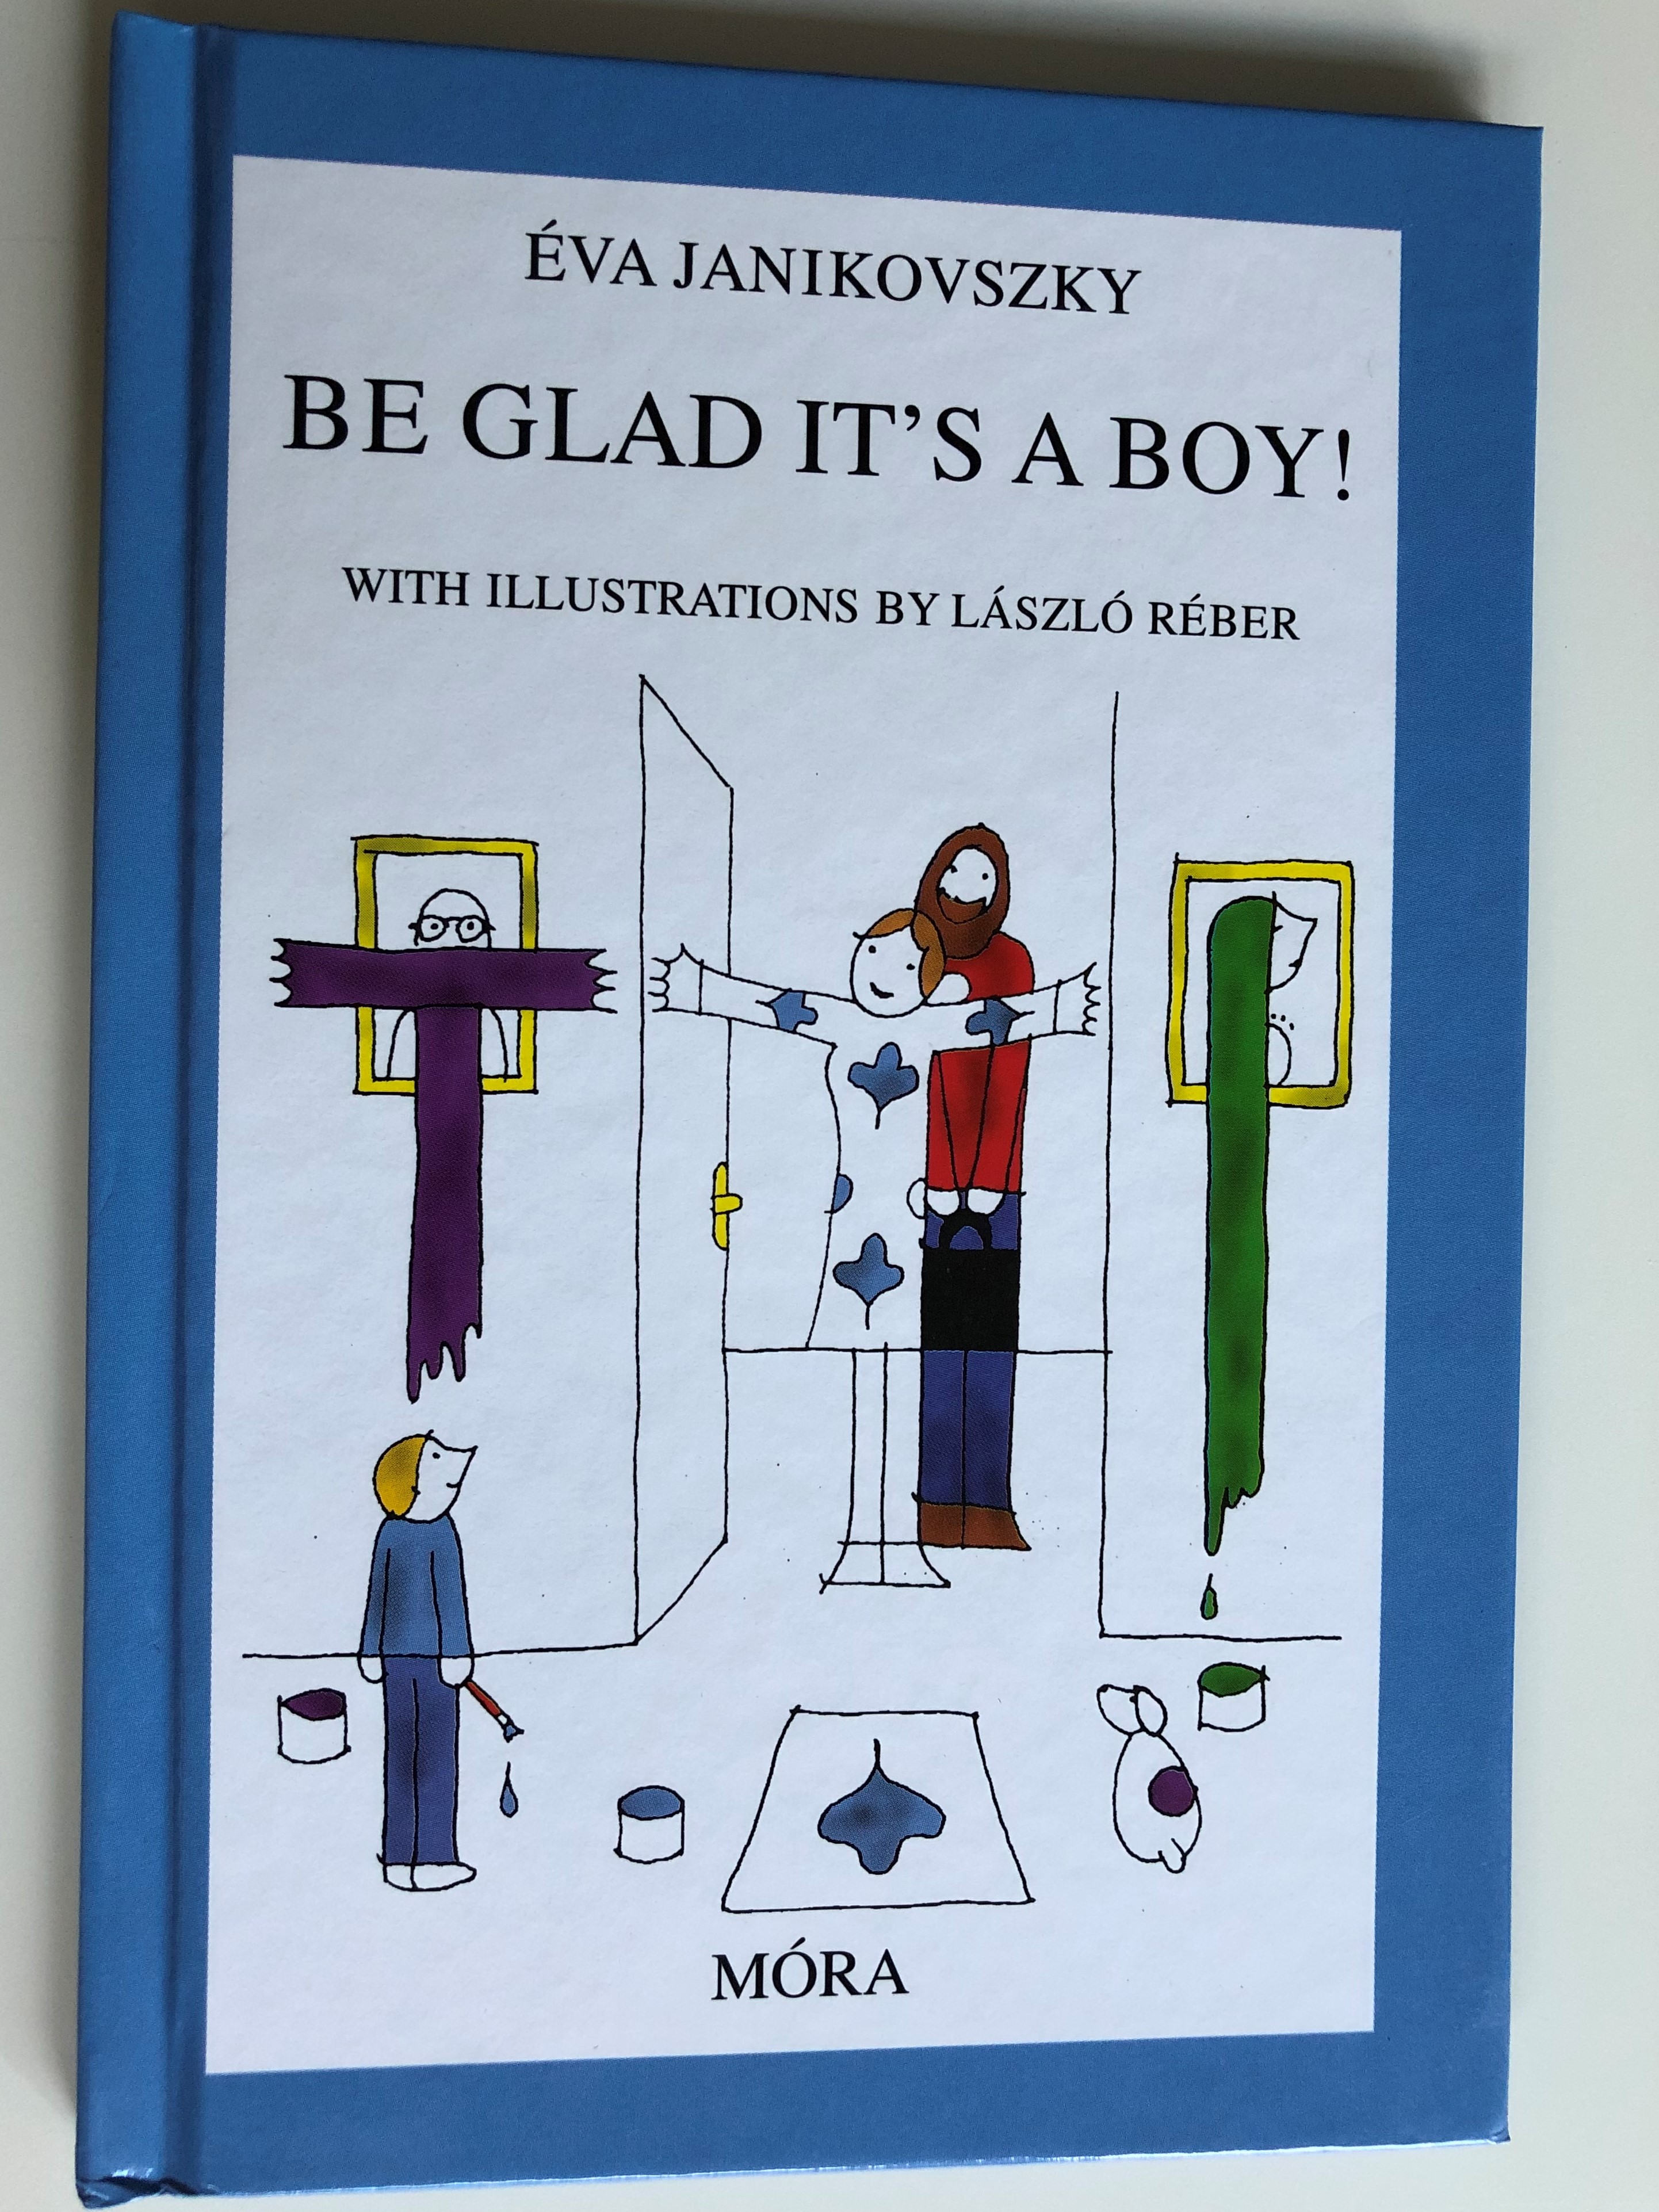 be-glad-it-s-a-boy-by-va-janikovszky-with-illustrations-by-l-szl-r-ber-m-ra-publishing-house-2008-1-.jpg